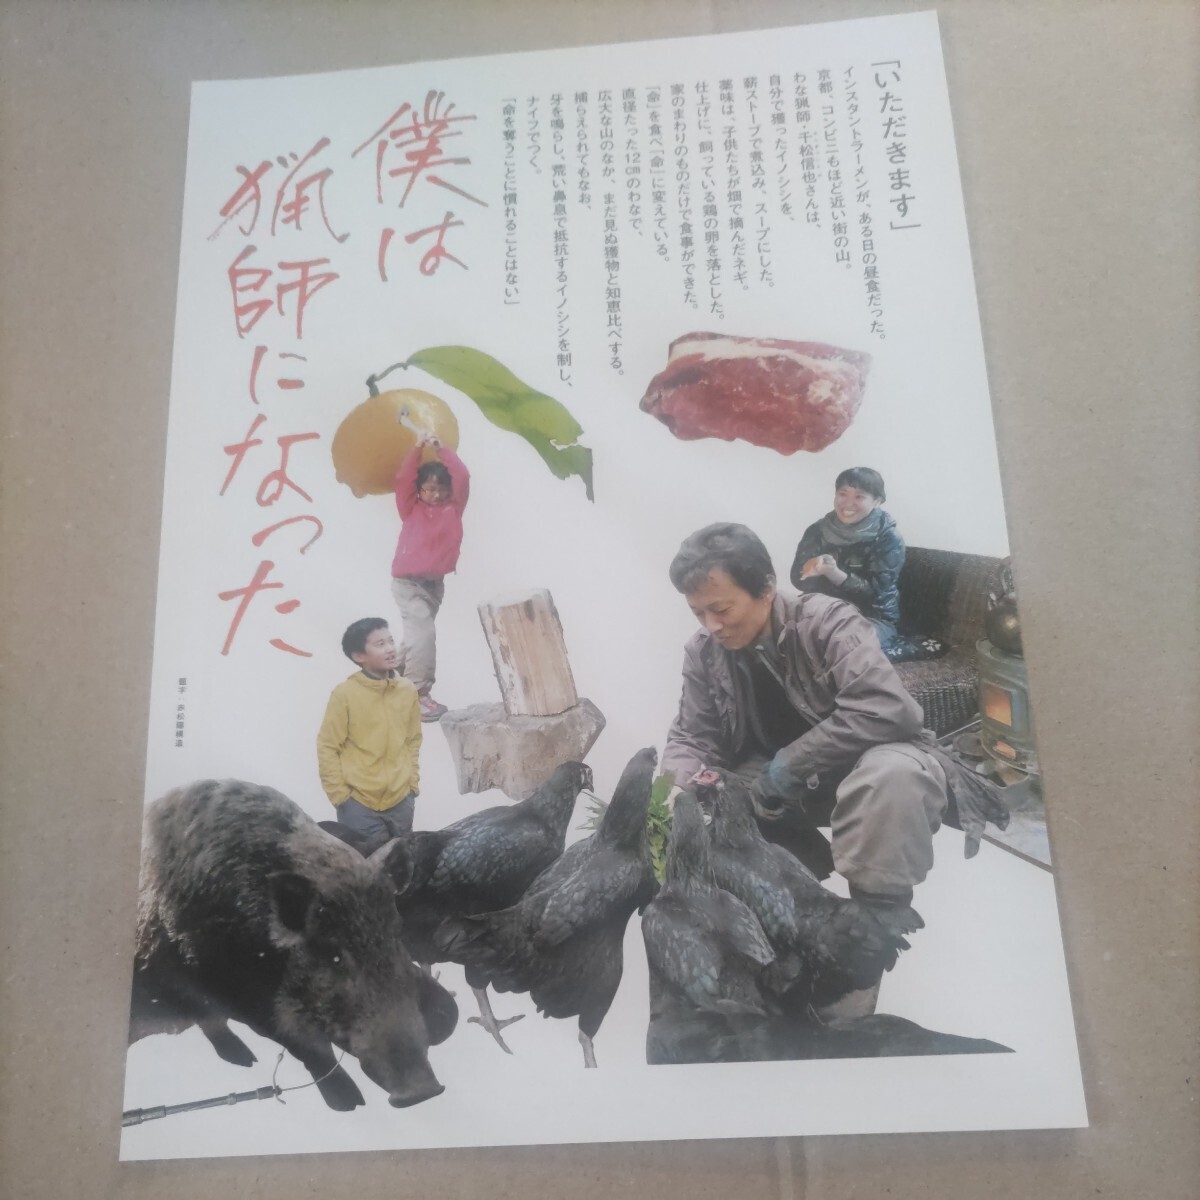 . is .. became *. pine ../ thousand pine confidence .* movie leaflet 